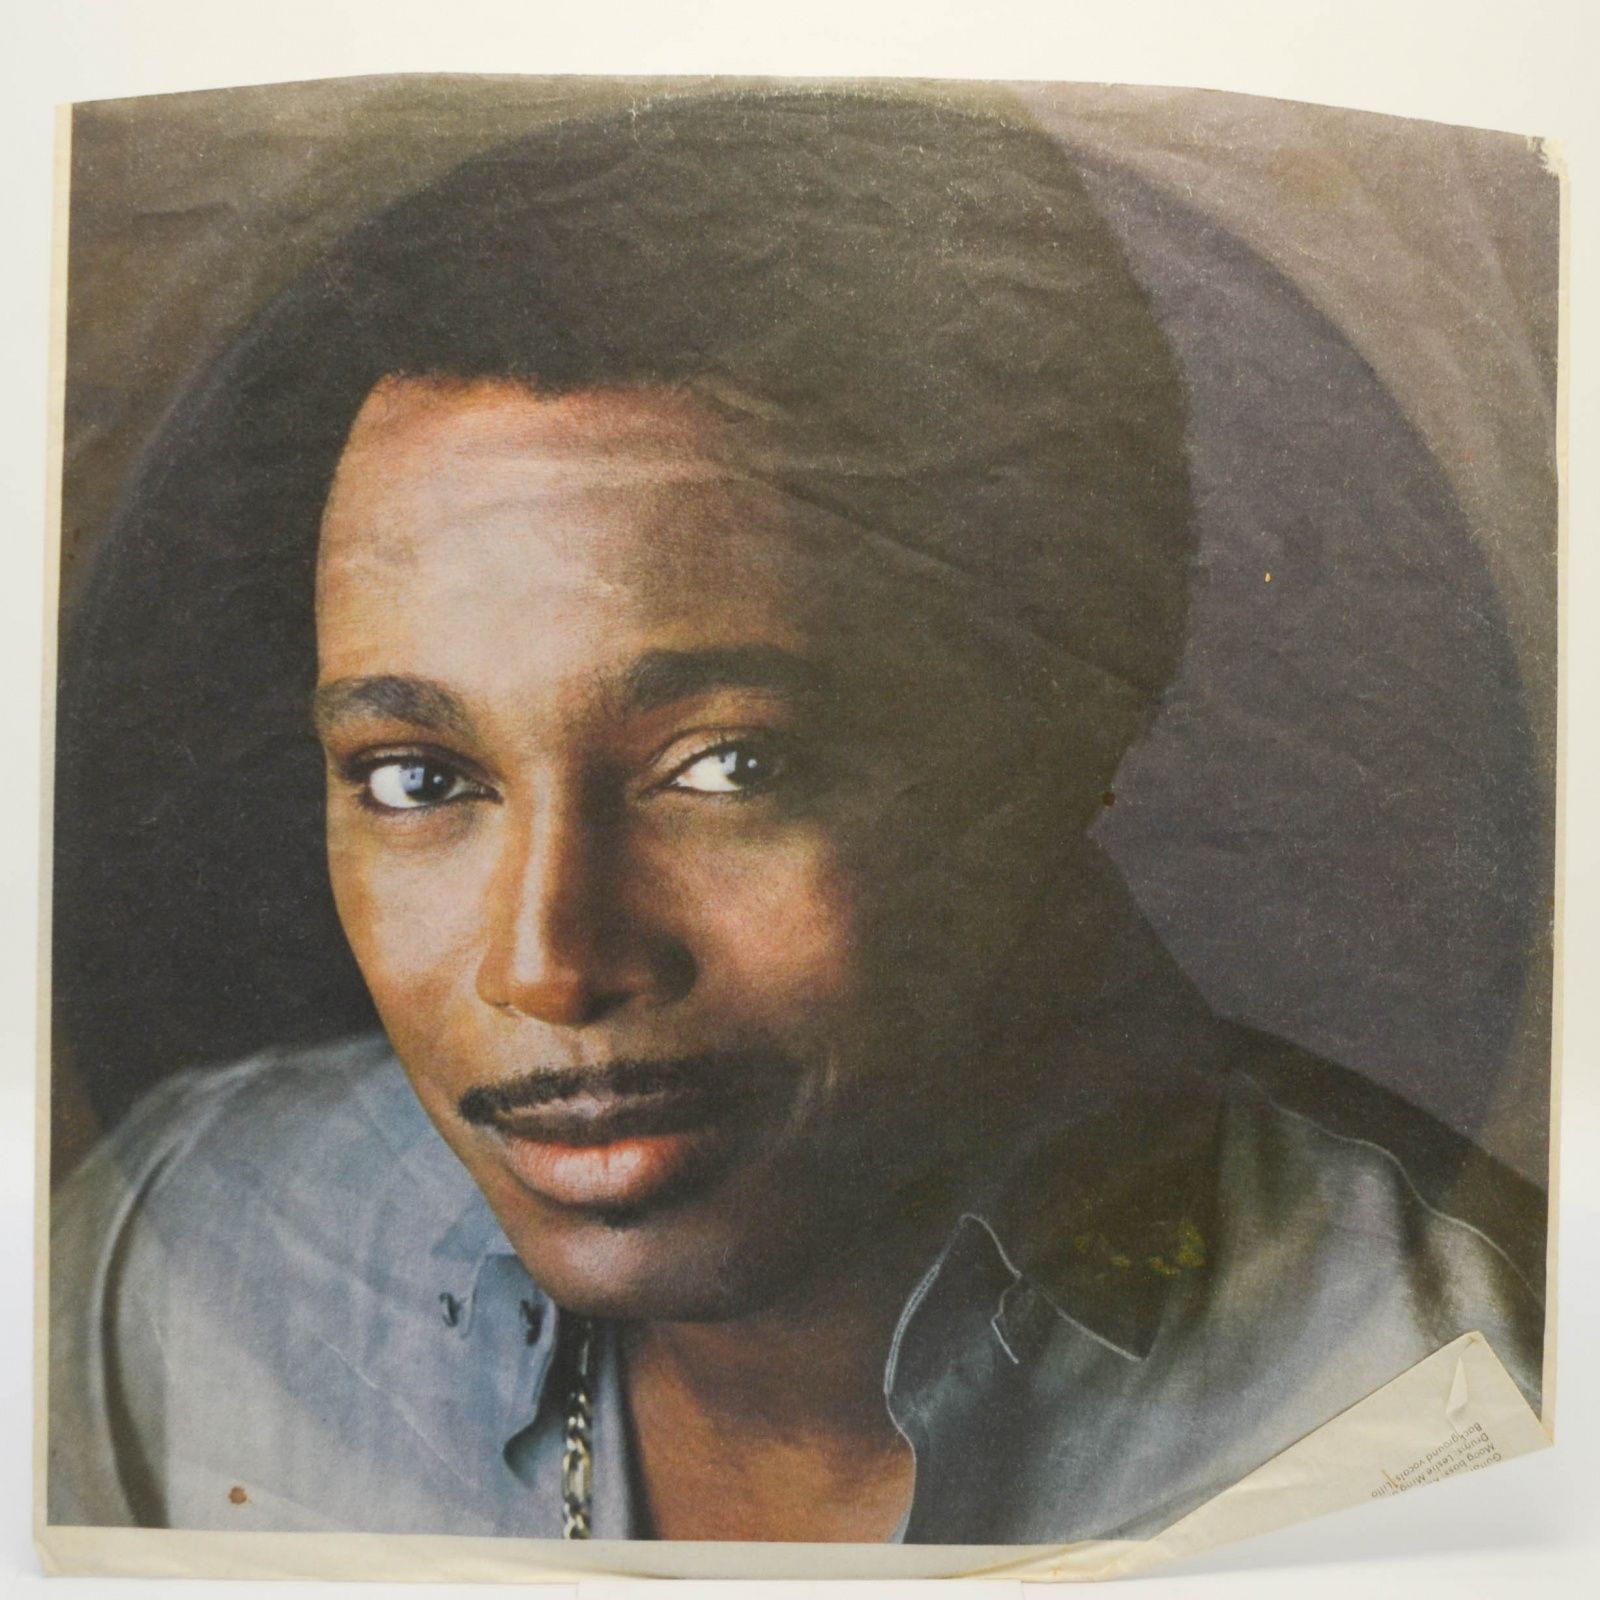 George Benson — In Your Eyes, 1983